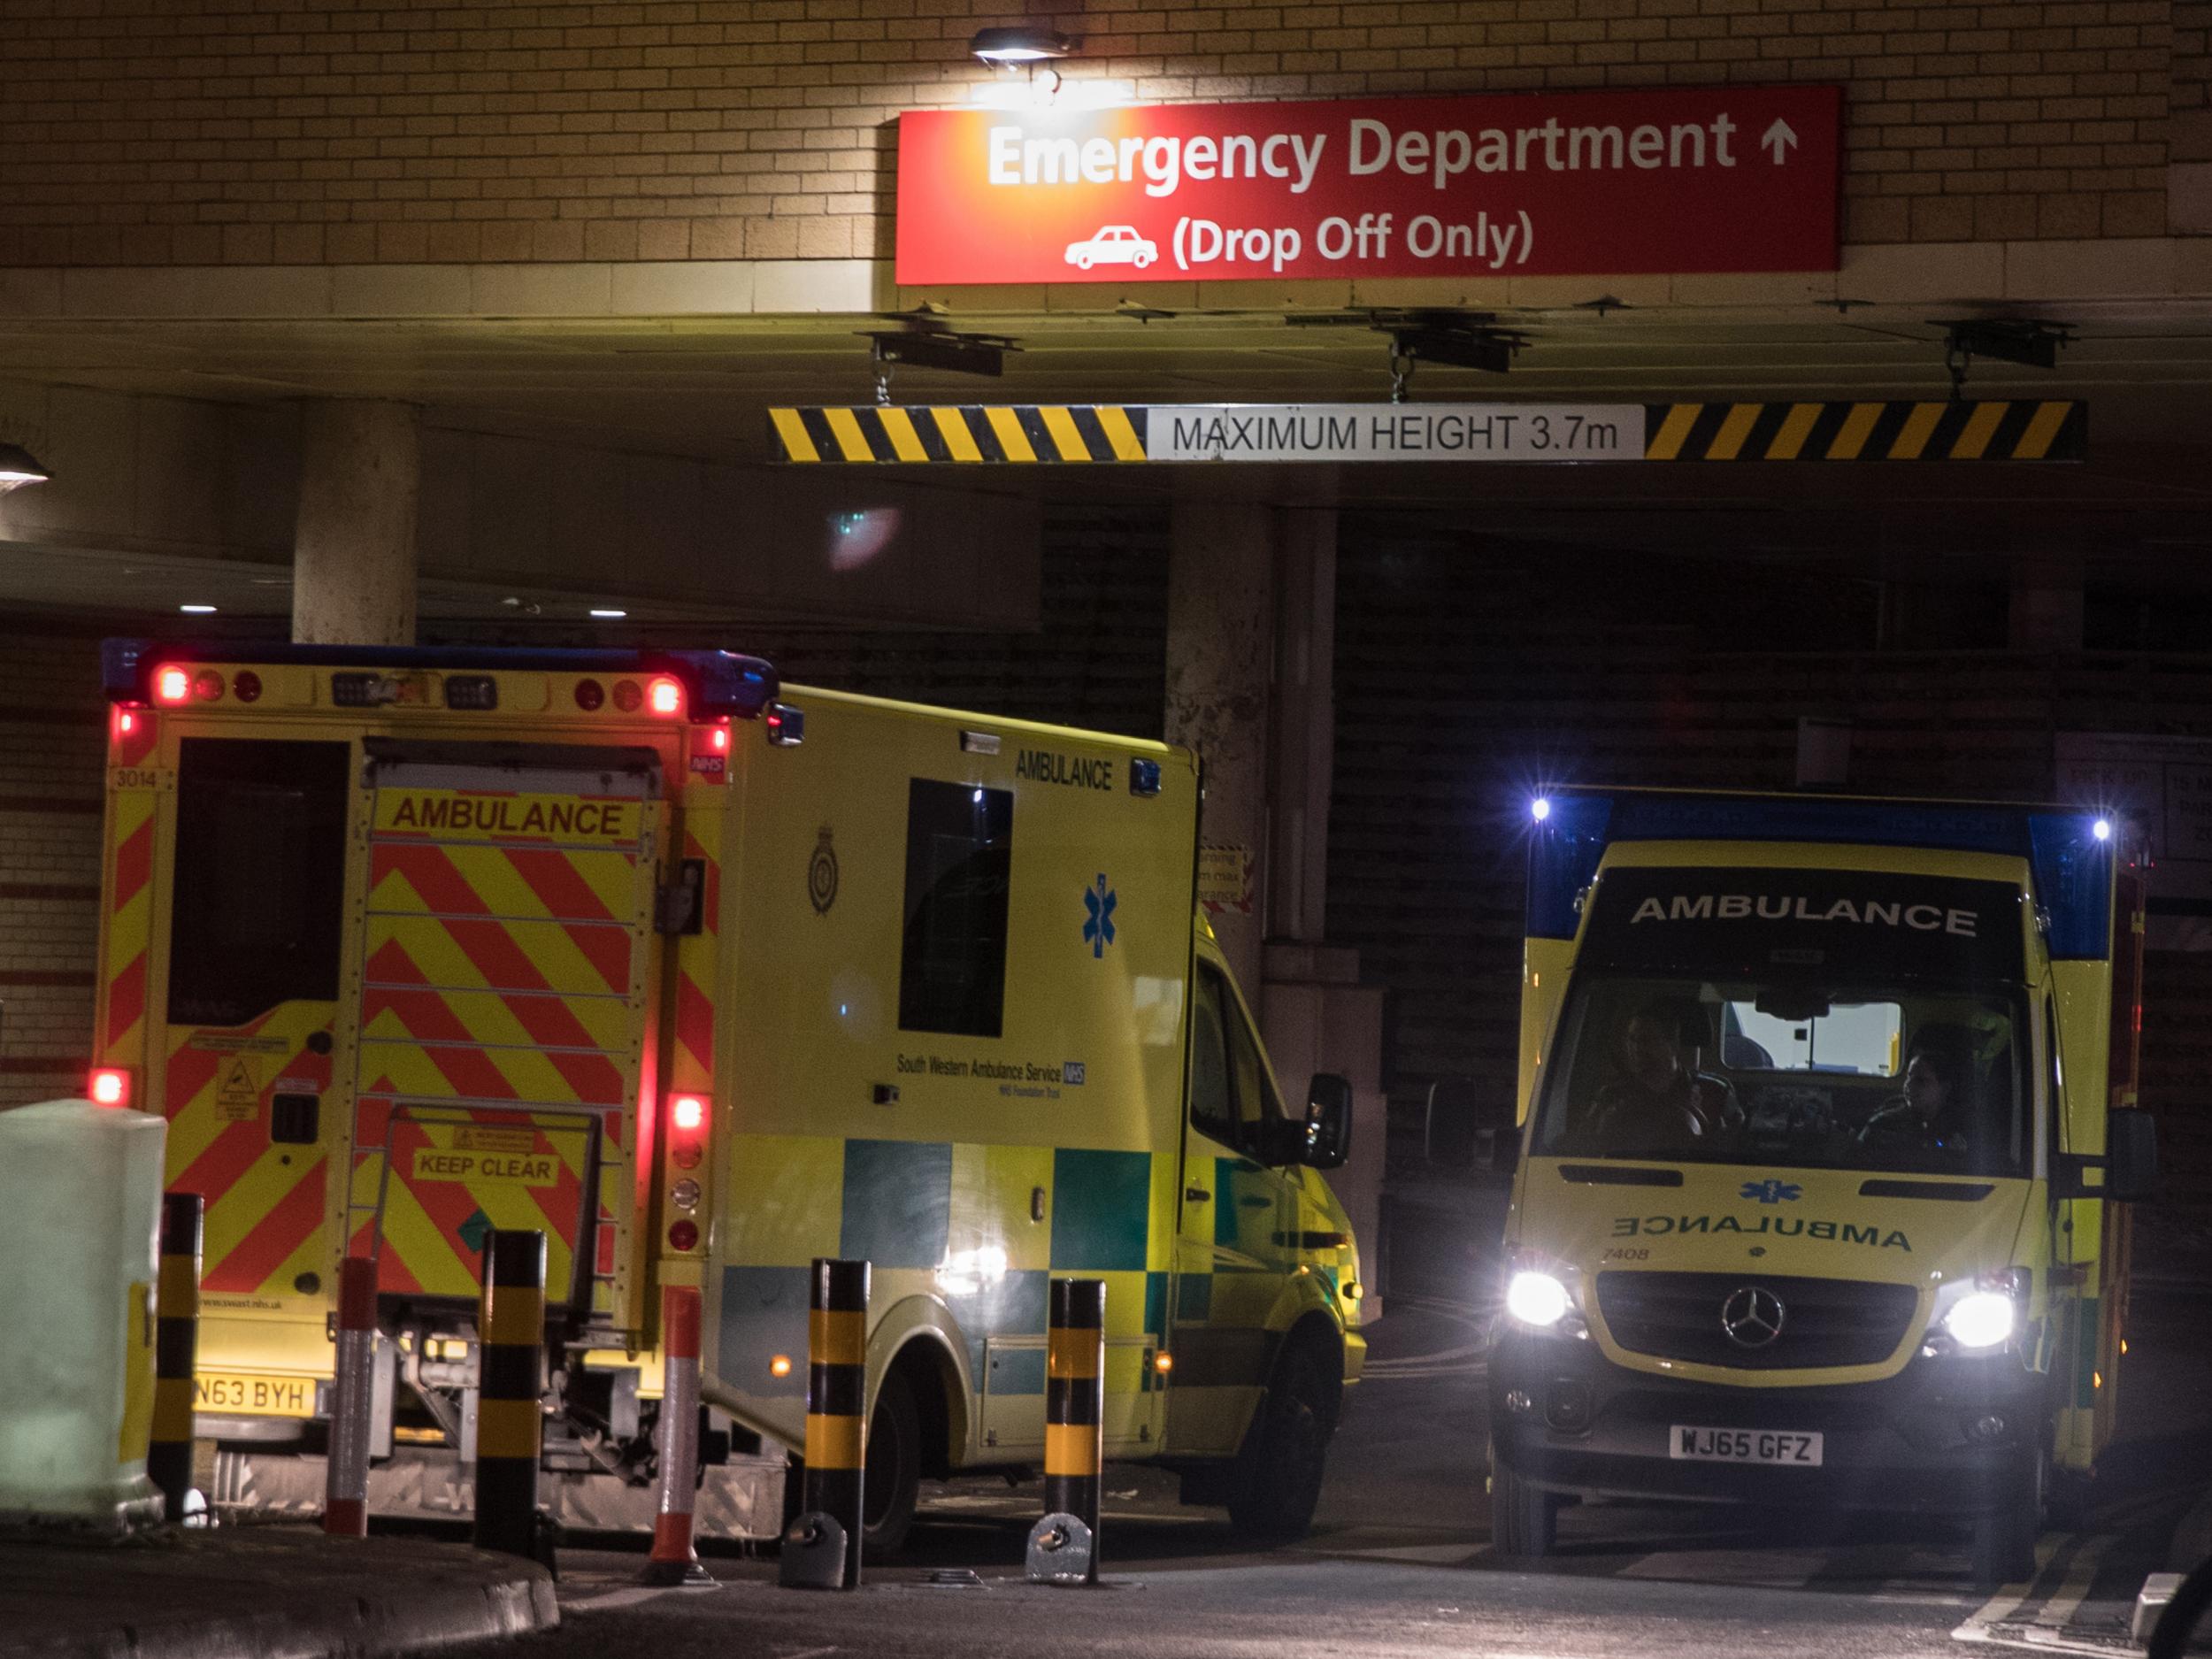 Funding meant for ‘transformation’ and essential building improvements has plugged deficits in A&E departments